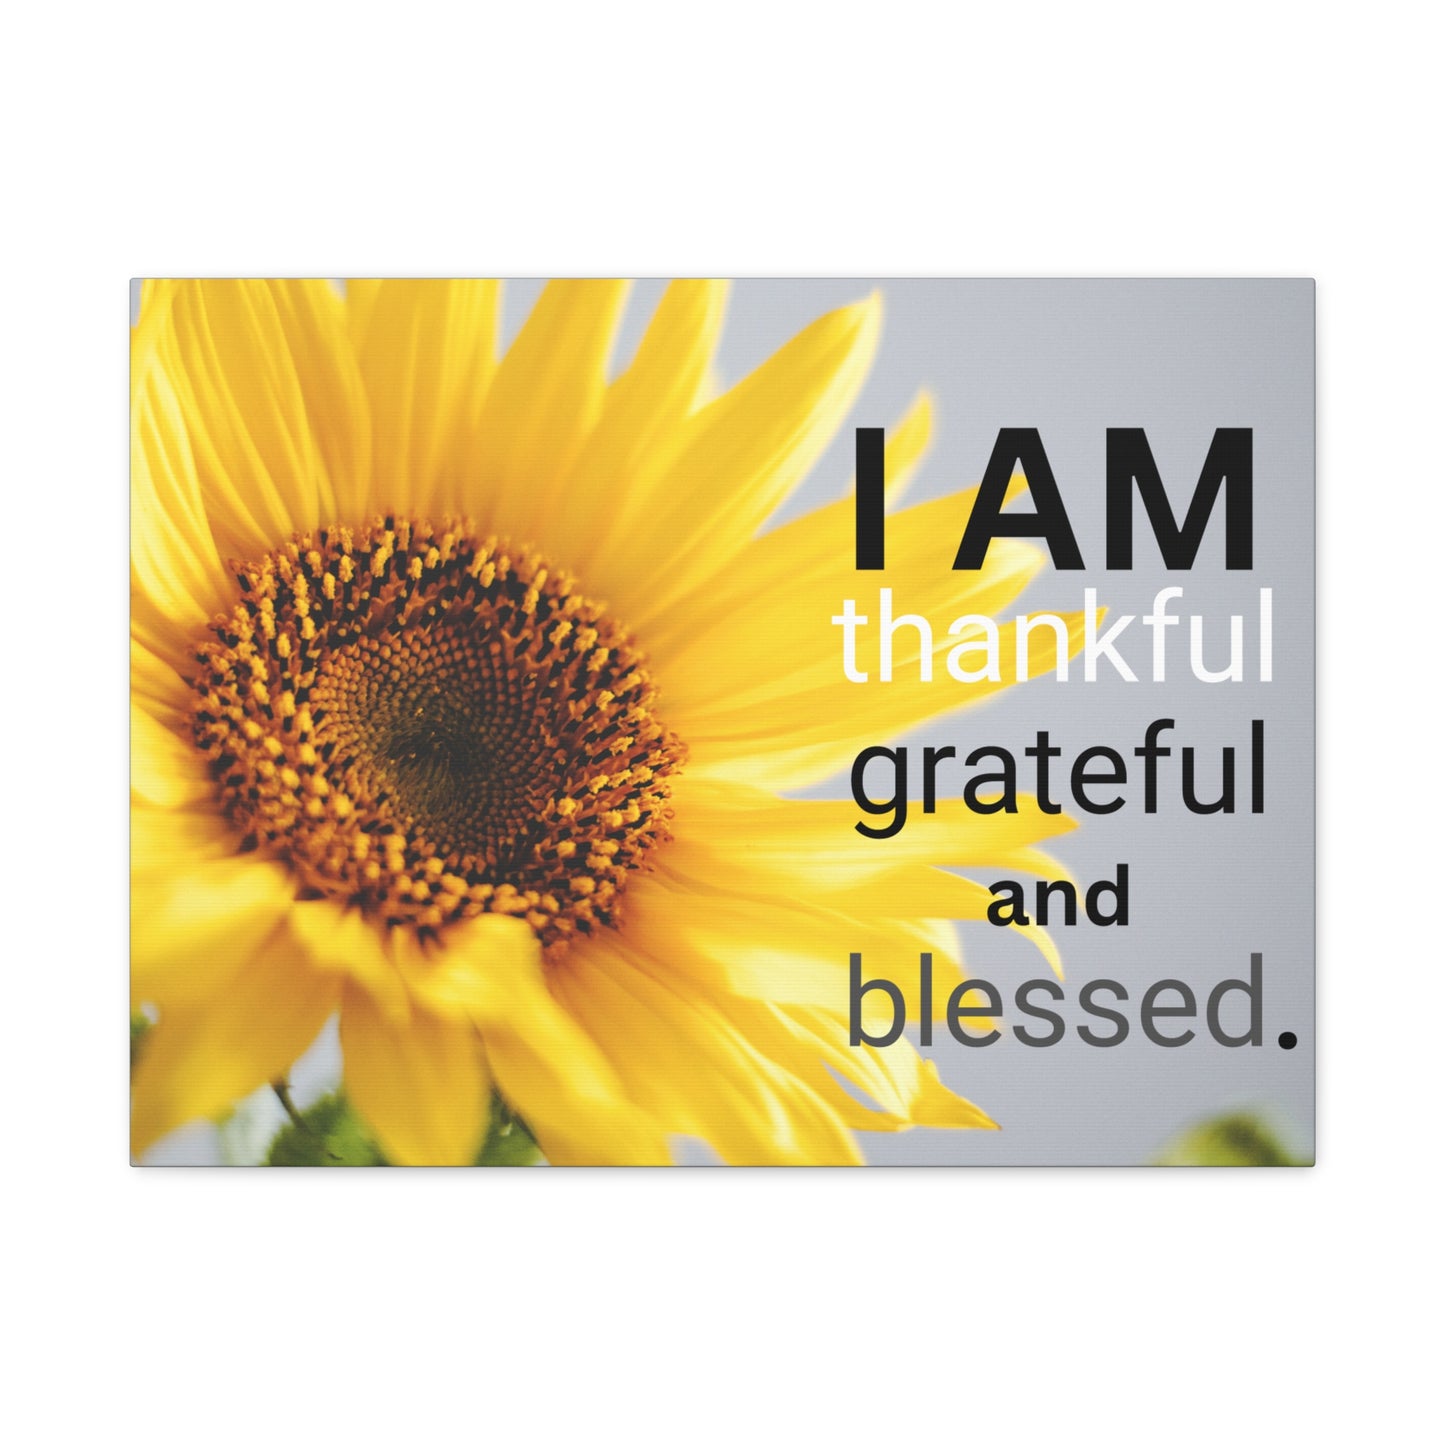 Christian Wall Art: I am Thankful, Grateful and Blessed (Wood Frame Ready to Hang)